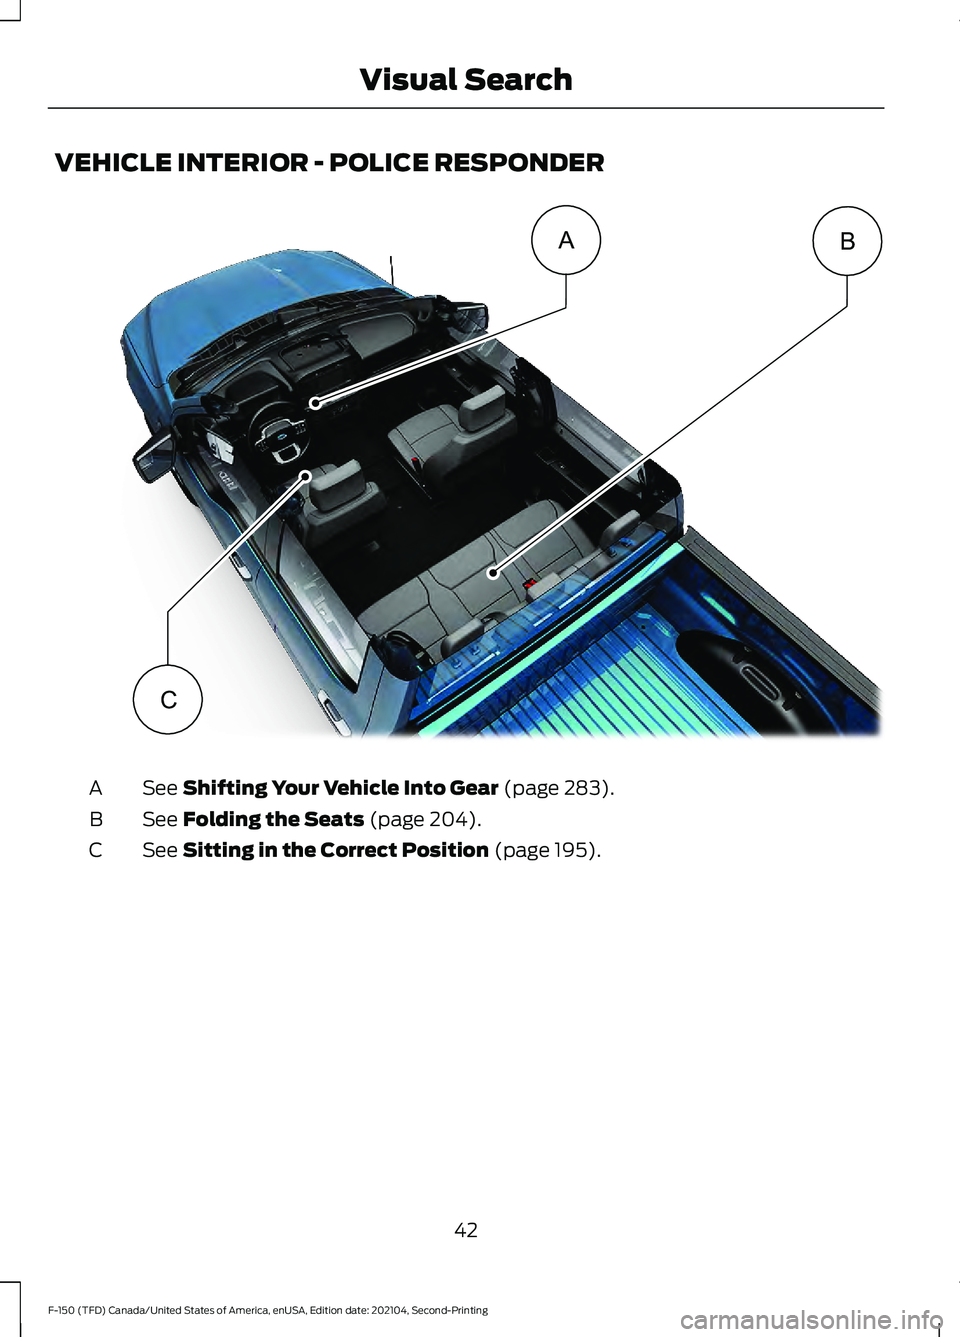 FORD F-150 2021  Owners Manual VEHICLE INTERIOR - POLICE RESPONDER
See Shifting Your Vehicle Into Gear (page 283).
A
See 
Folding the Seats (page 204).
B
See 
Sitting in the Correct Position (page 195).
C
42
F-150 (TFD) Canada/Unit